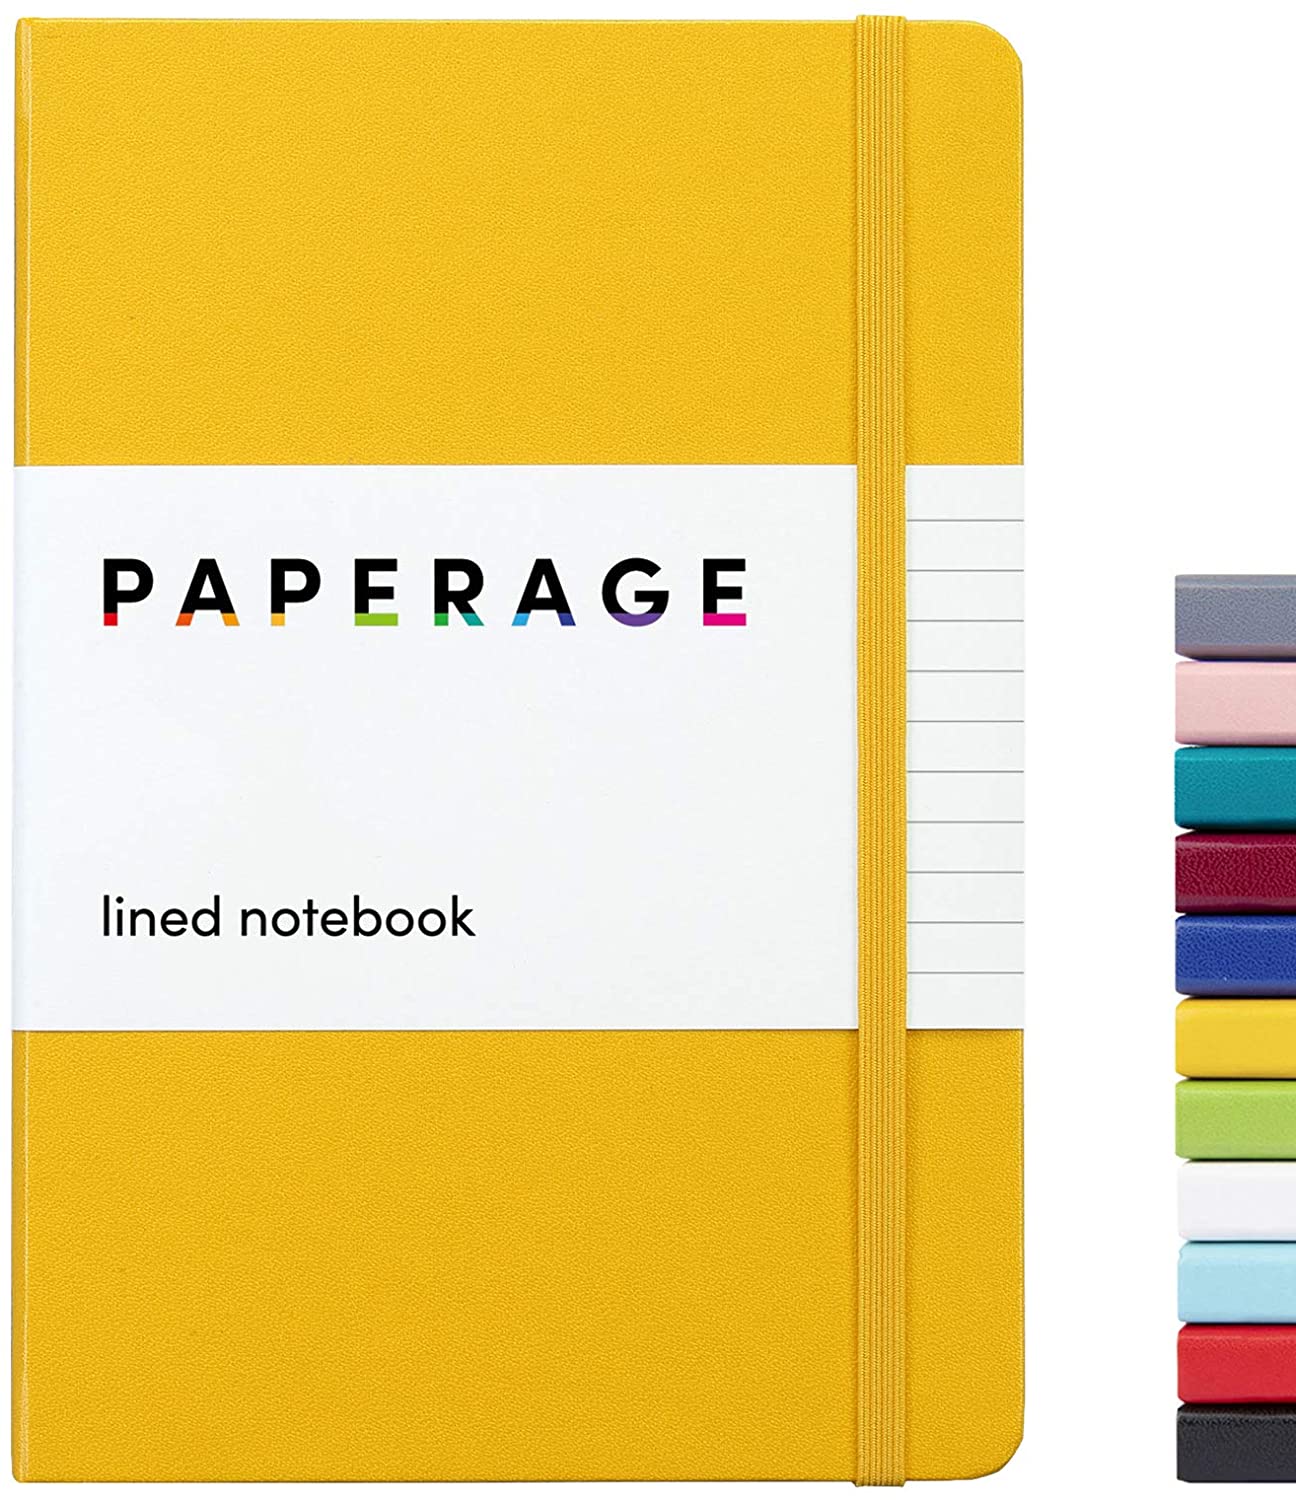 Paperage Lined Journal Notebook, Hard Cover, Medium 5.7 x 8 inches, 100 gsm  Thick Paper (Yellow, Ruled) - Faceted Media Digital Marketing + Web Design